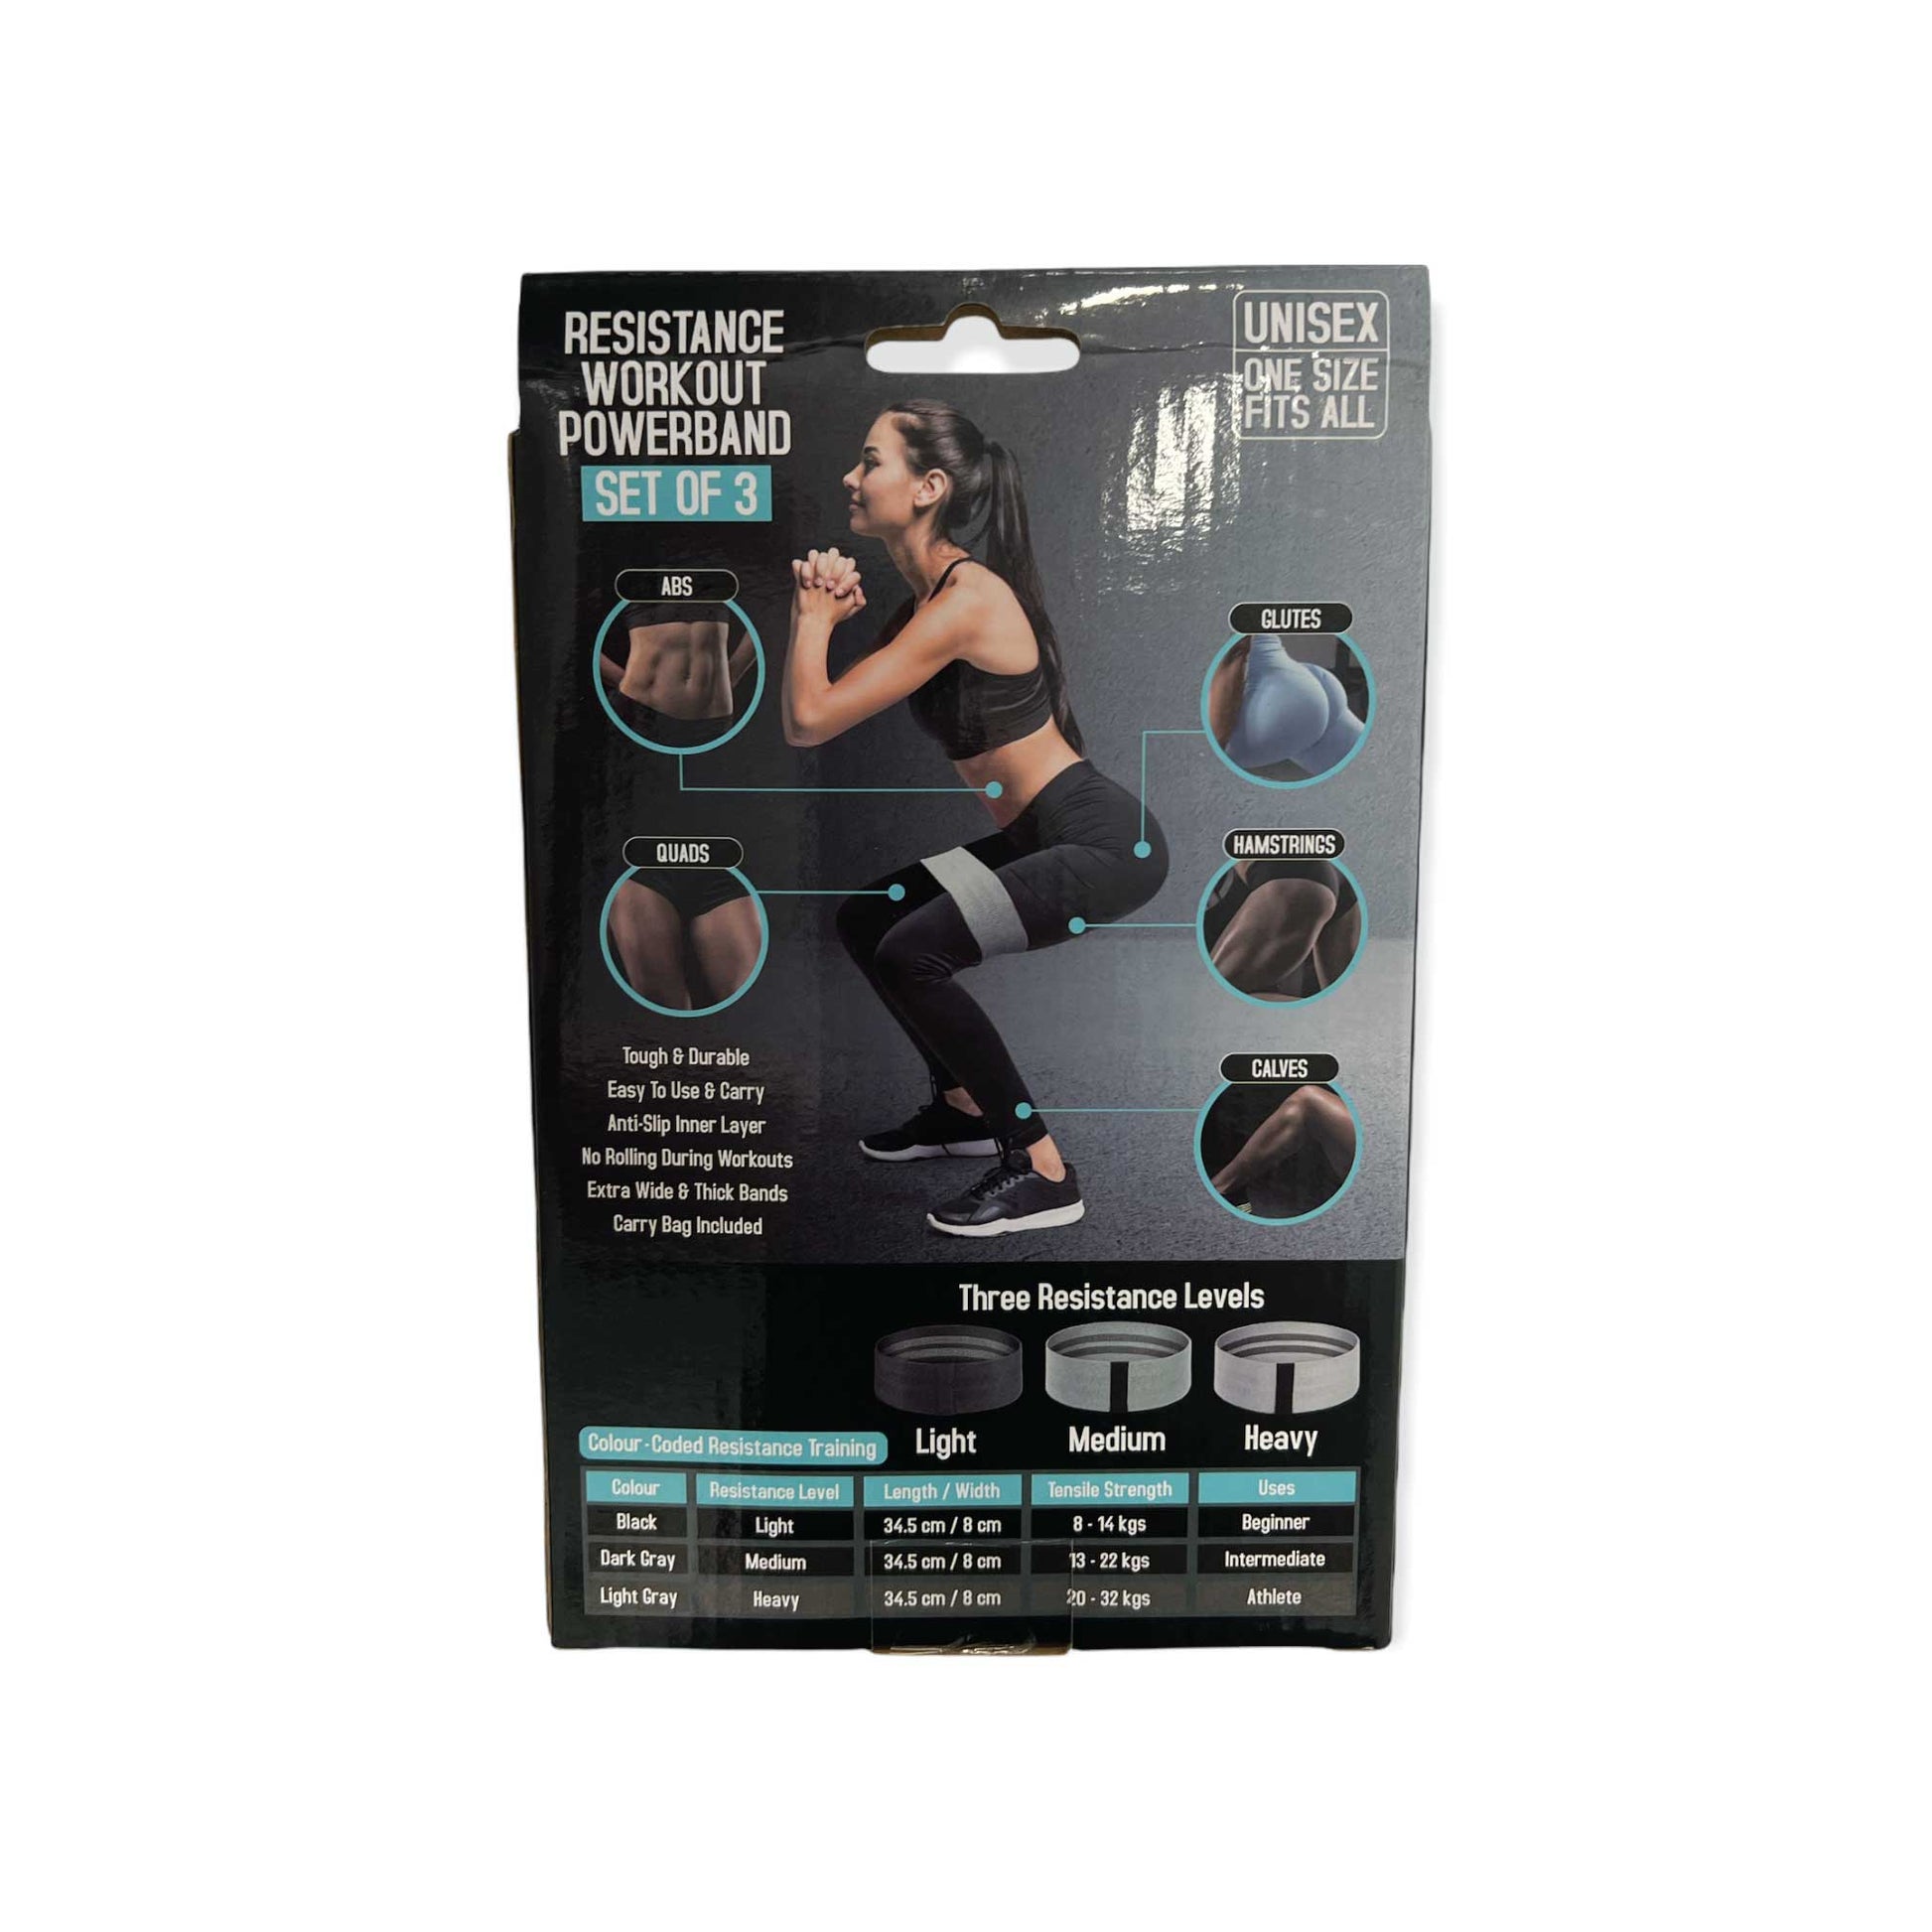 Resistance Workout Power Band 3 Set Exercise Booty Pilates Gym Fitness Loop